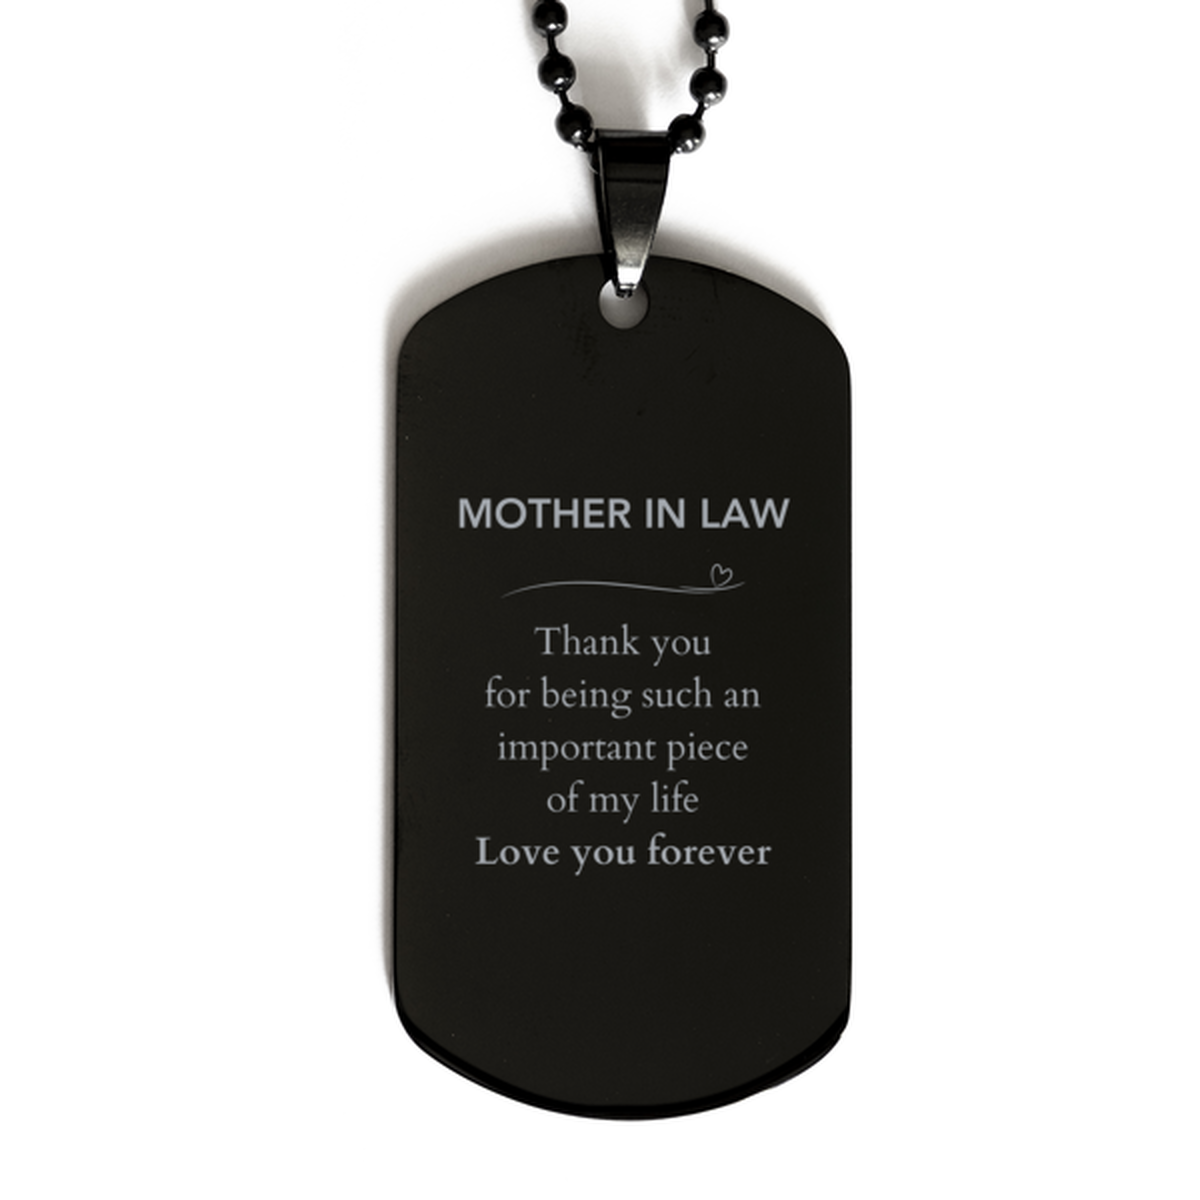 Appropriate Mother In Law Black Dog Tag Epic Birthday Gifts for Mother In Law Thank you for being such an important piece of my life Mother In Law Christmas Mothers Fathers Day